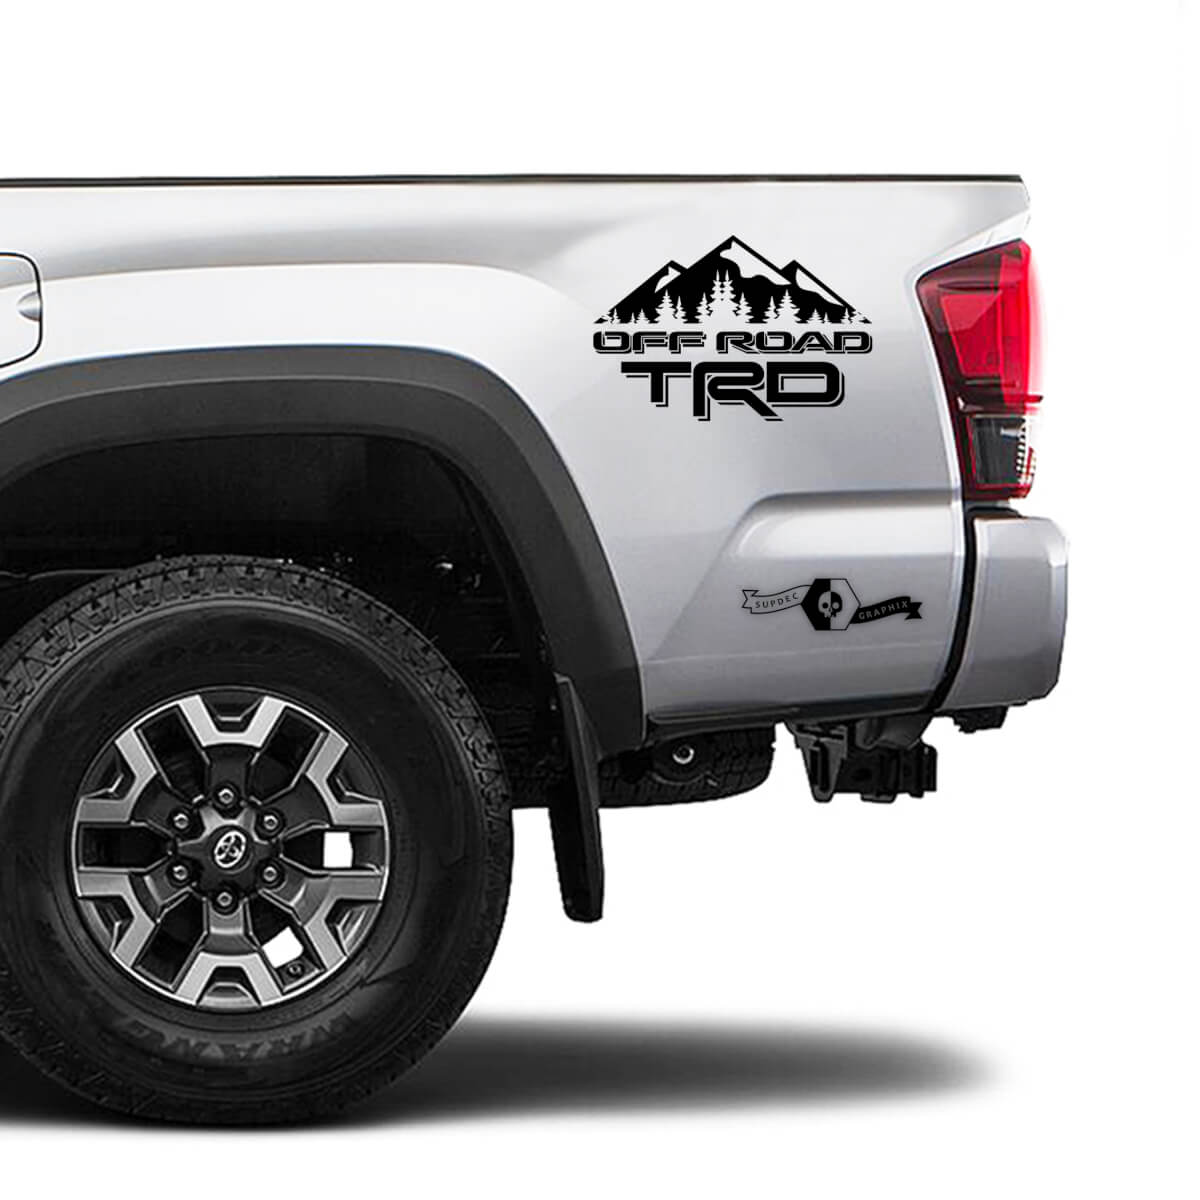 TRD 4x4 Off Road TOYOTA Mountains Decals Stickers for Tacoma Tundra 4Runner Hilux doors